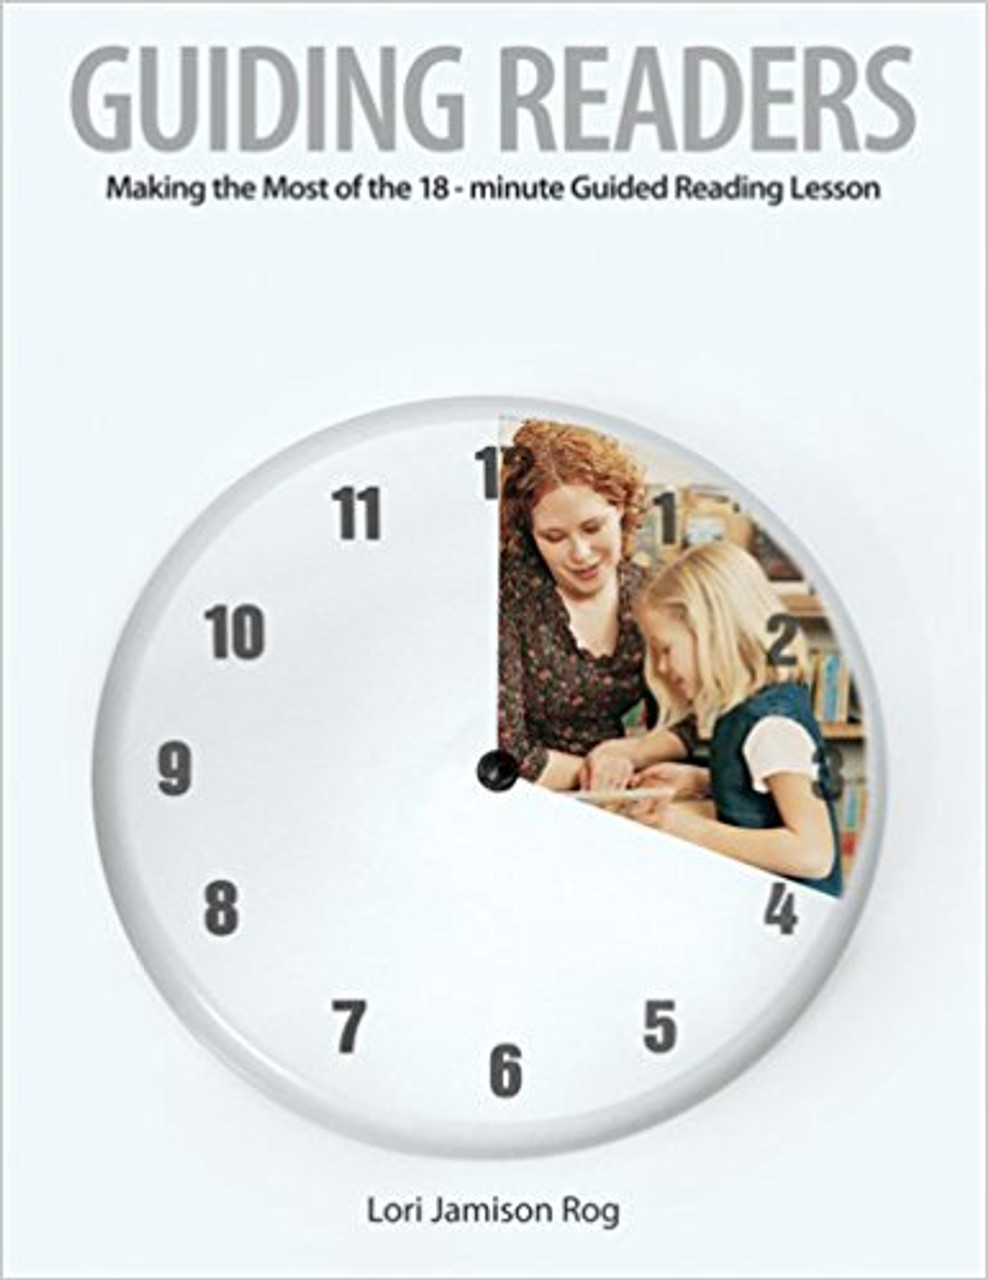 Guiding Readers: Making the Most of the 18-Minute Guided Reading Lesson by Lori Jamison Rog